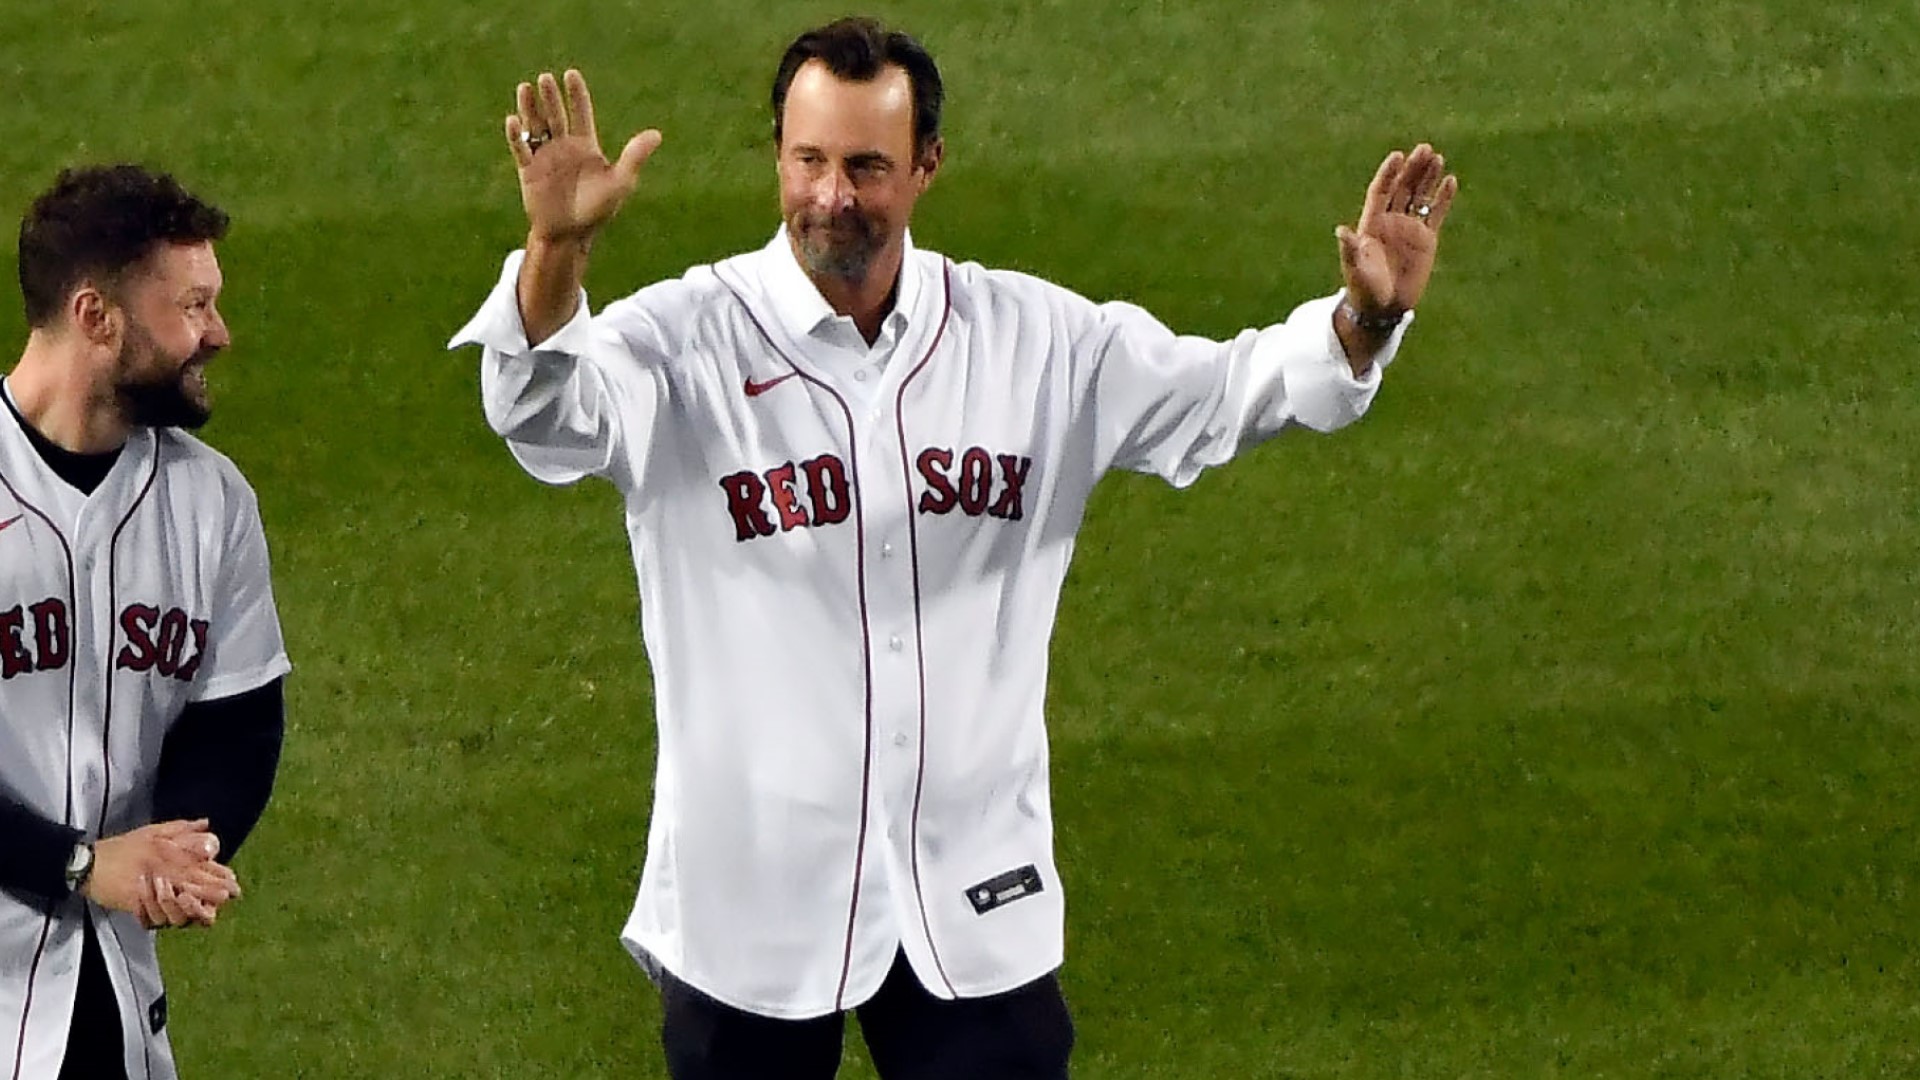 These Instances Showcased Tim Wakefield As Ultimate Teammate